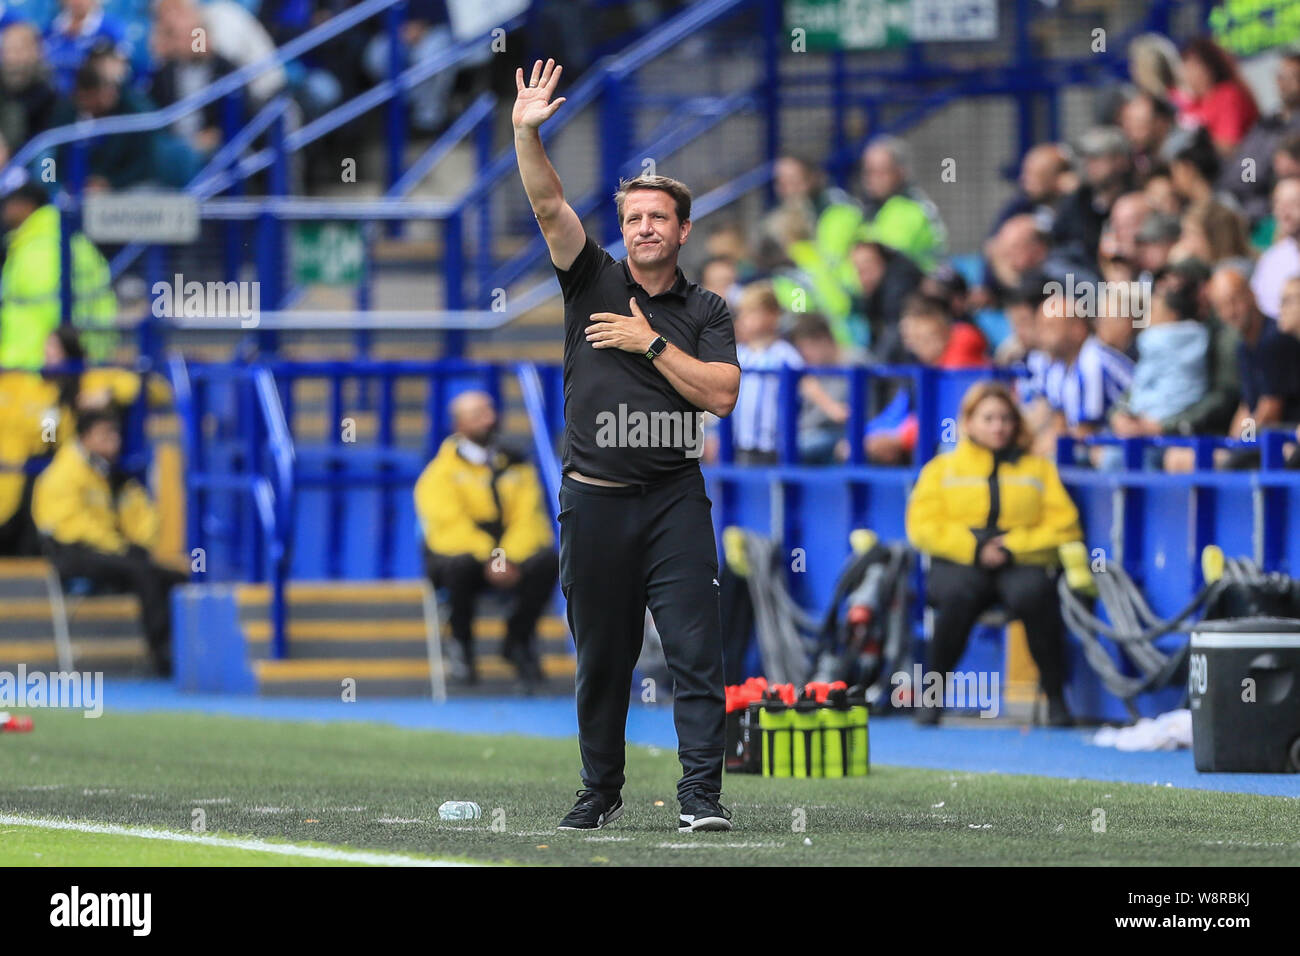 10th August 2019 , Hillsborough, Sheffield, England; Sky Bet Championship, Sheffield Wednesday vs Barnsley : Daniel Stendel manager of Barnsley FC during the game Credit: Mark Cosgrove/News Images,  English Football League images are subject to DataCo Licence Stock Photo